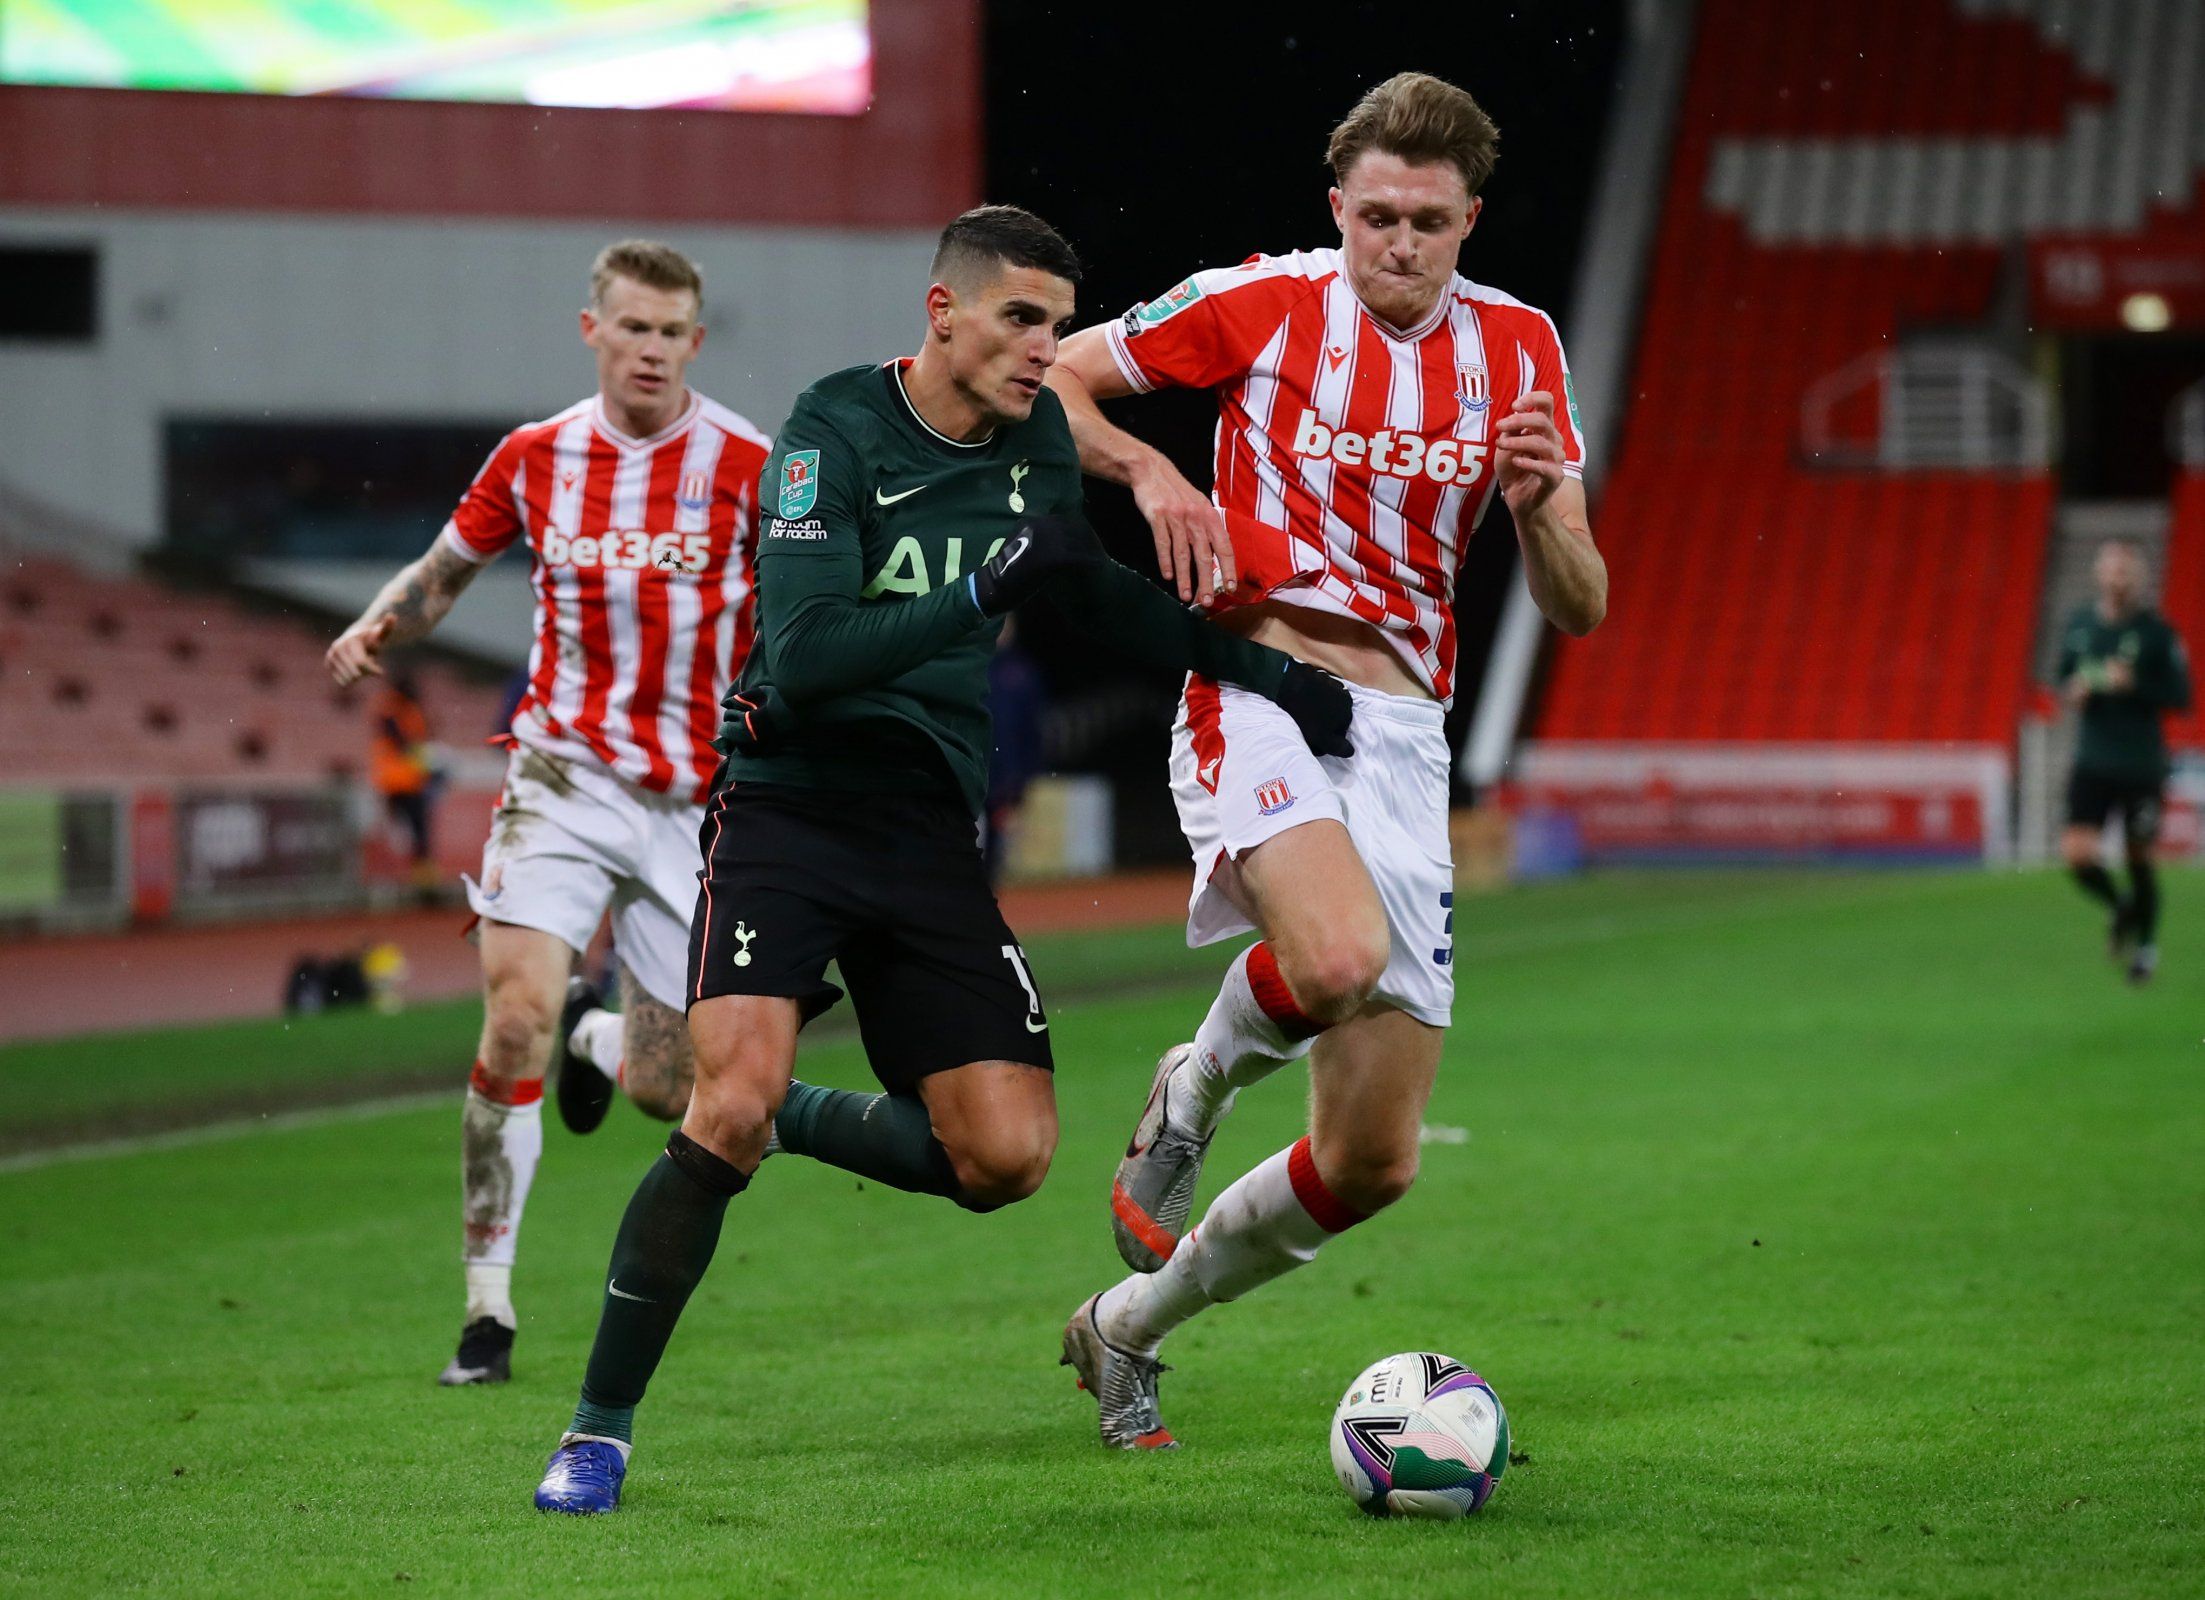 spurs winger in action vs stoke city carabao cup quarter final transfer rumours